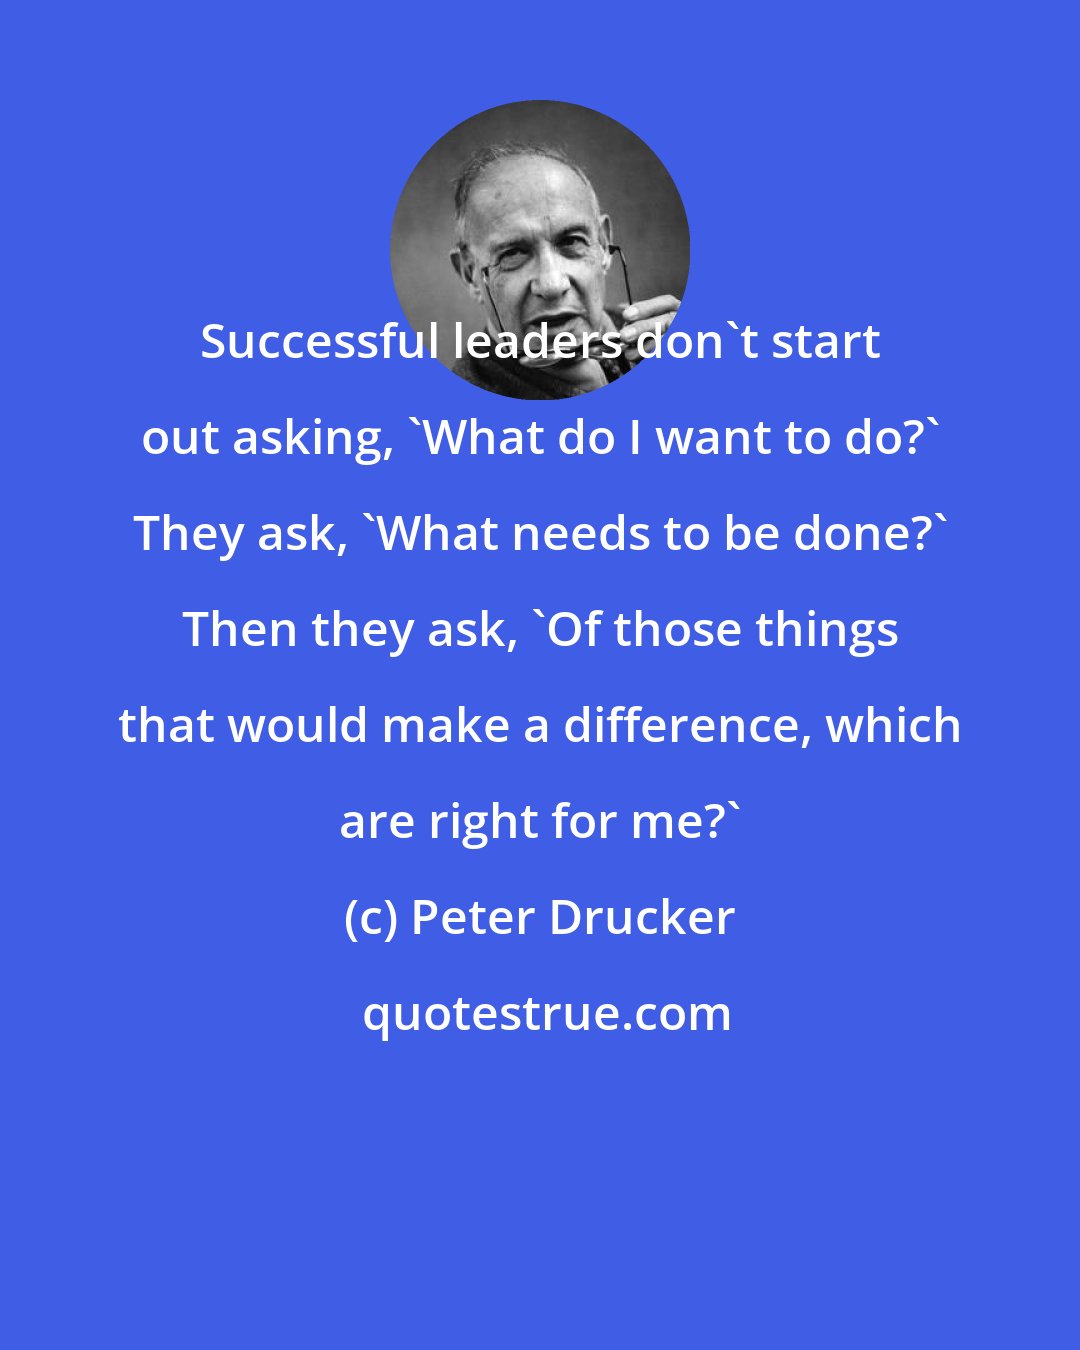 Peter Drucker: Successful leaders don't start out asking, 'What do I want to do?' They ask, 'What needs to be done?' Then they ask, 'Of those things that would make a difference, which are right for me?'